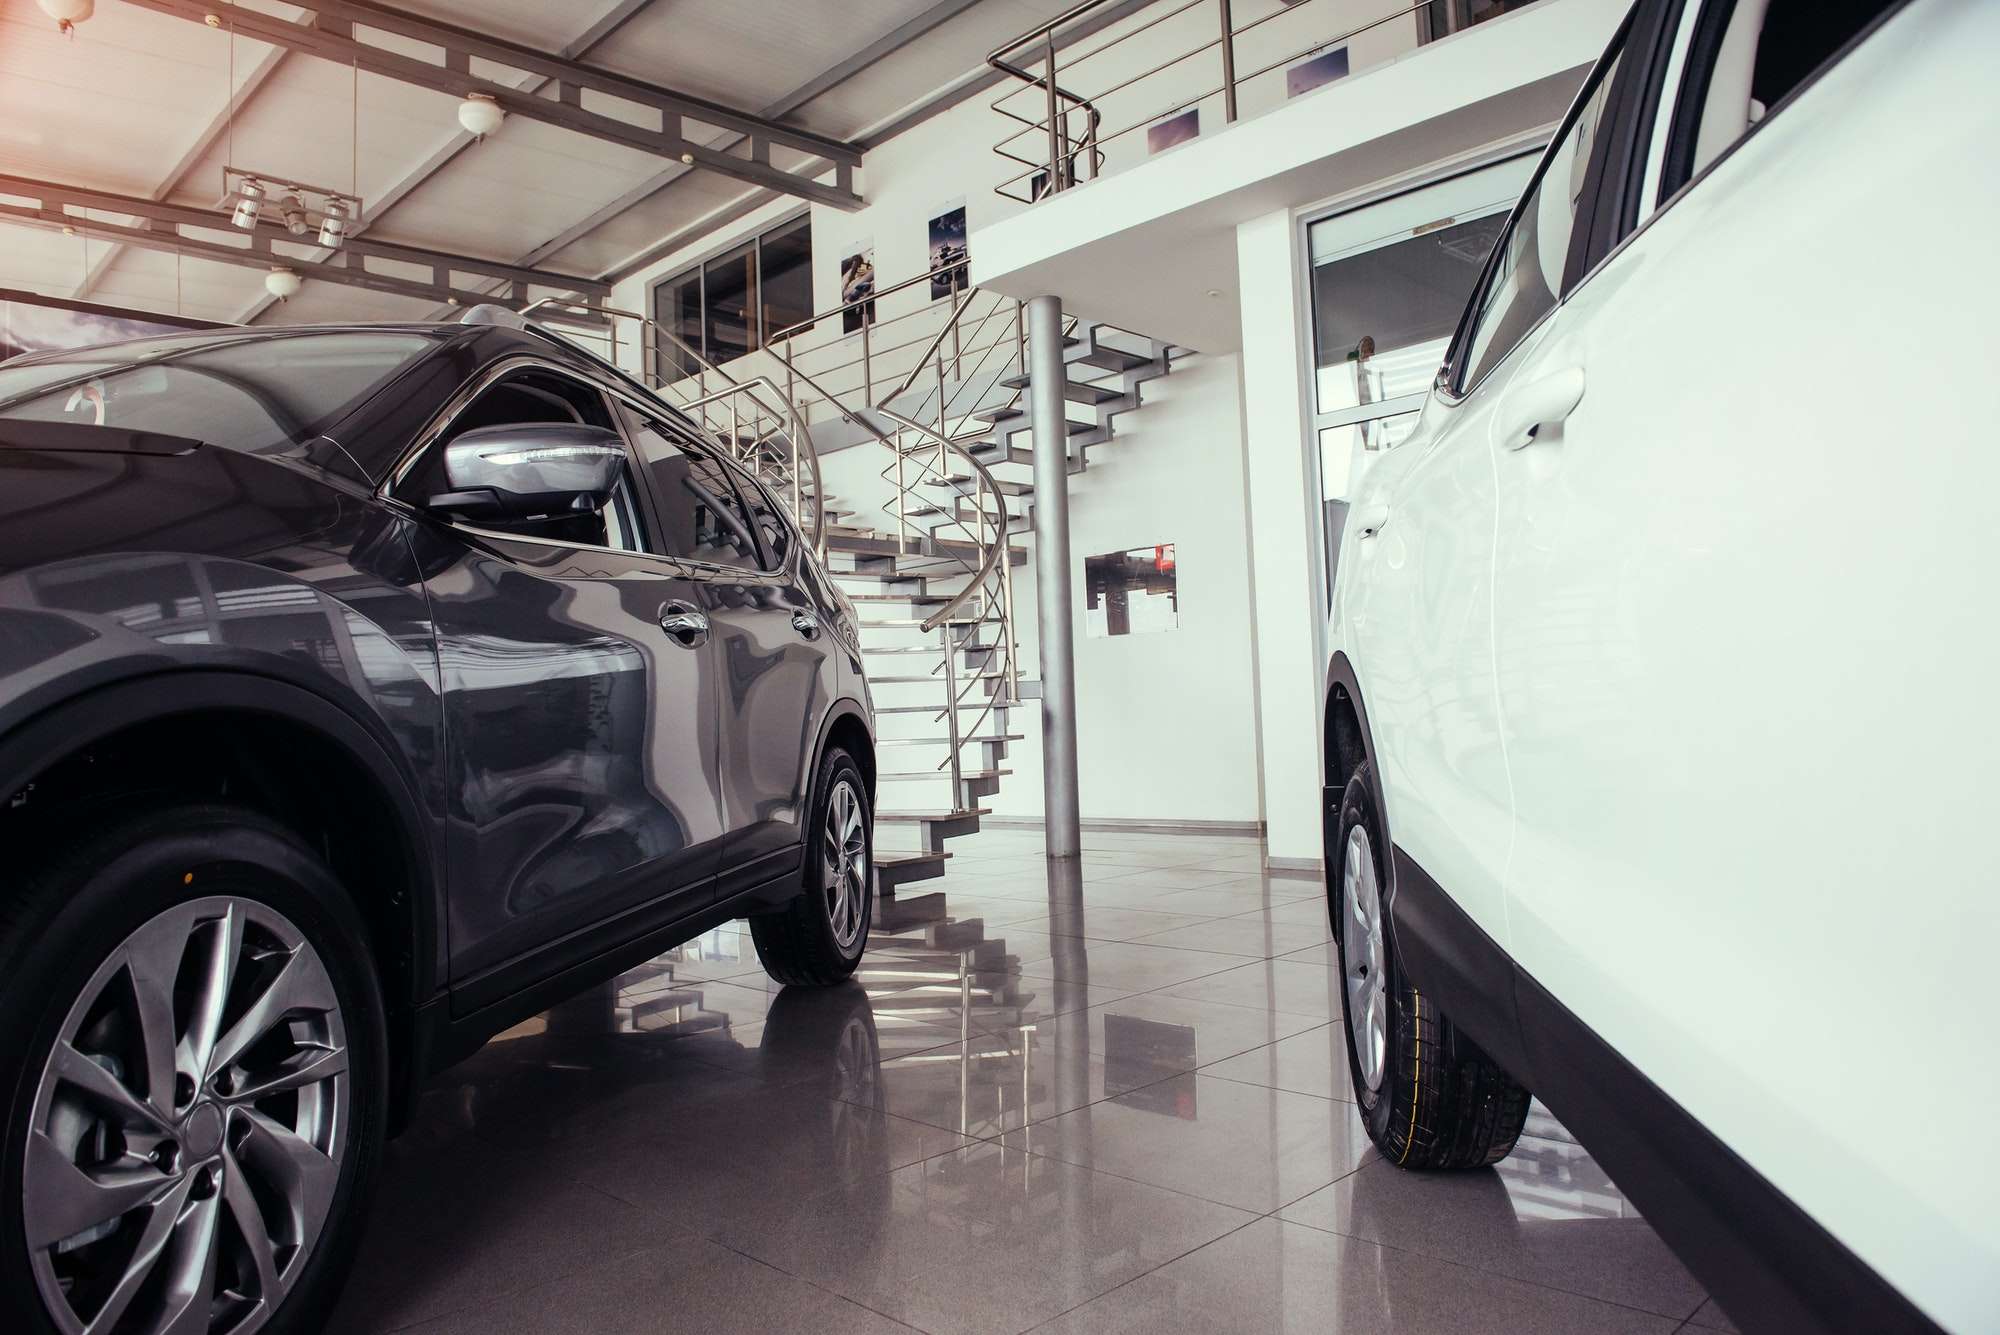 Car dealerships and showroom cleaning services